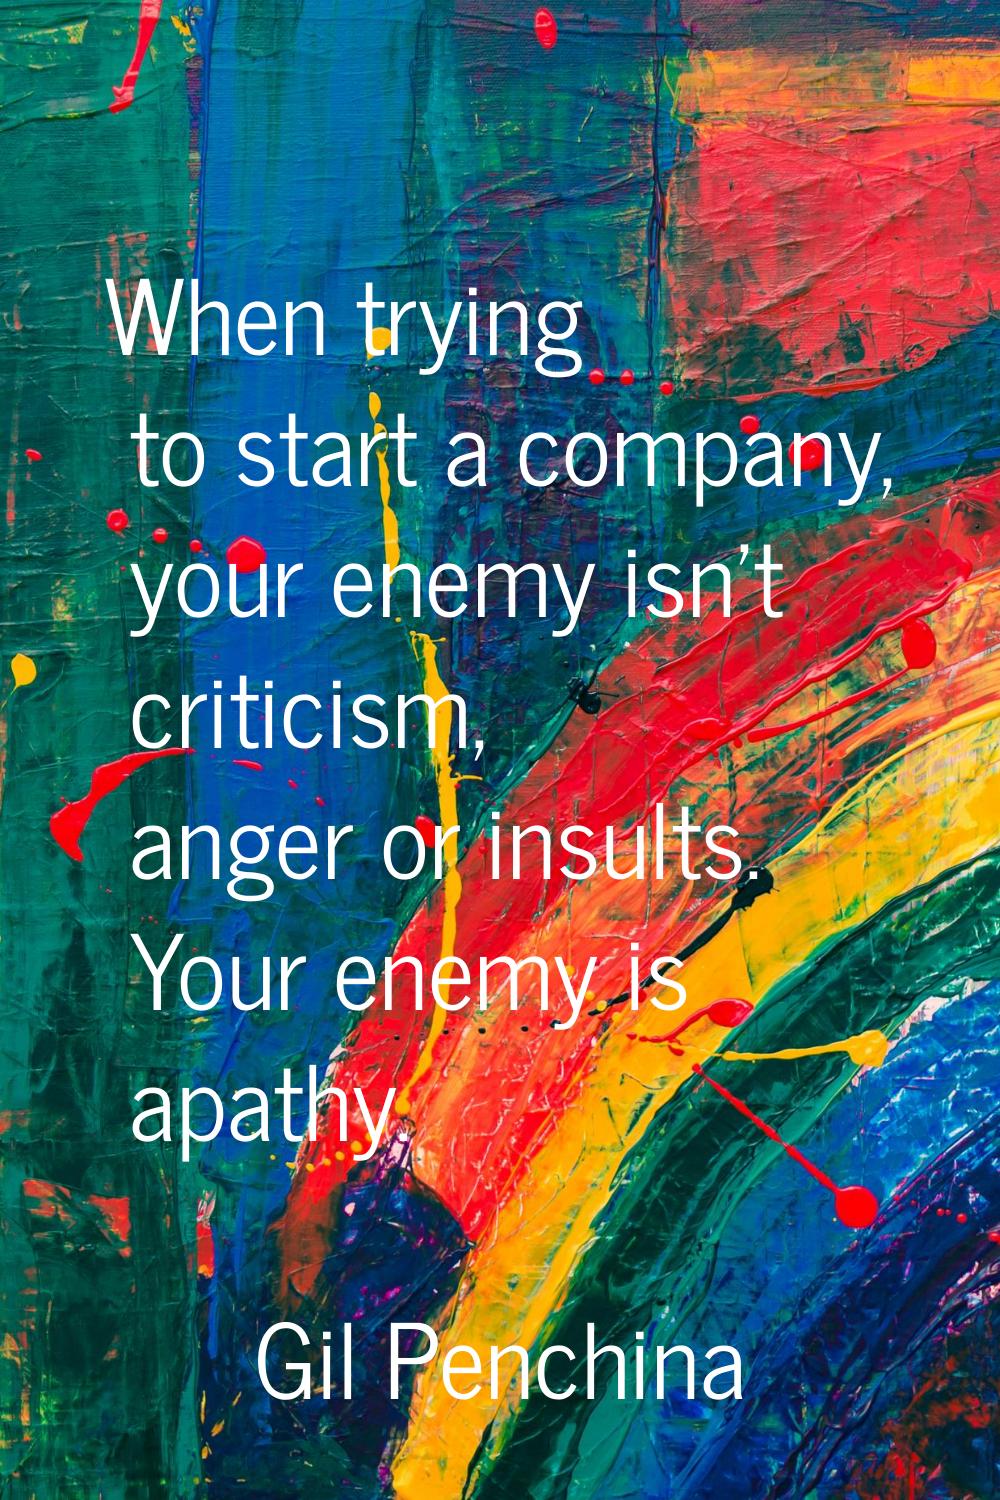 When trying to start a company, your enemy isn't criticism, anger or insults. Your enemy is apathy.